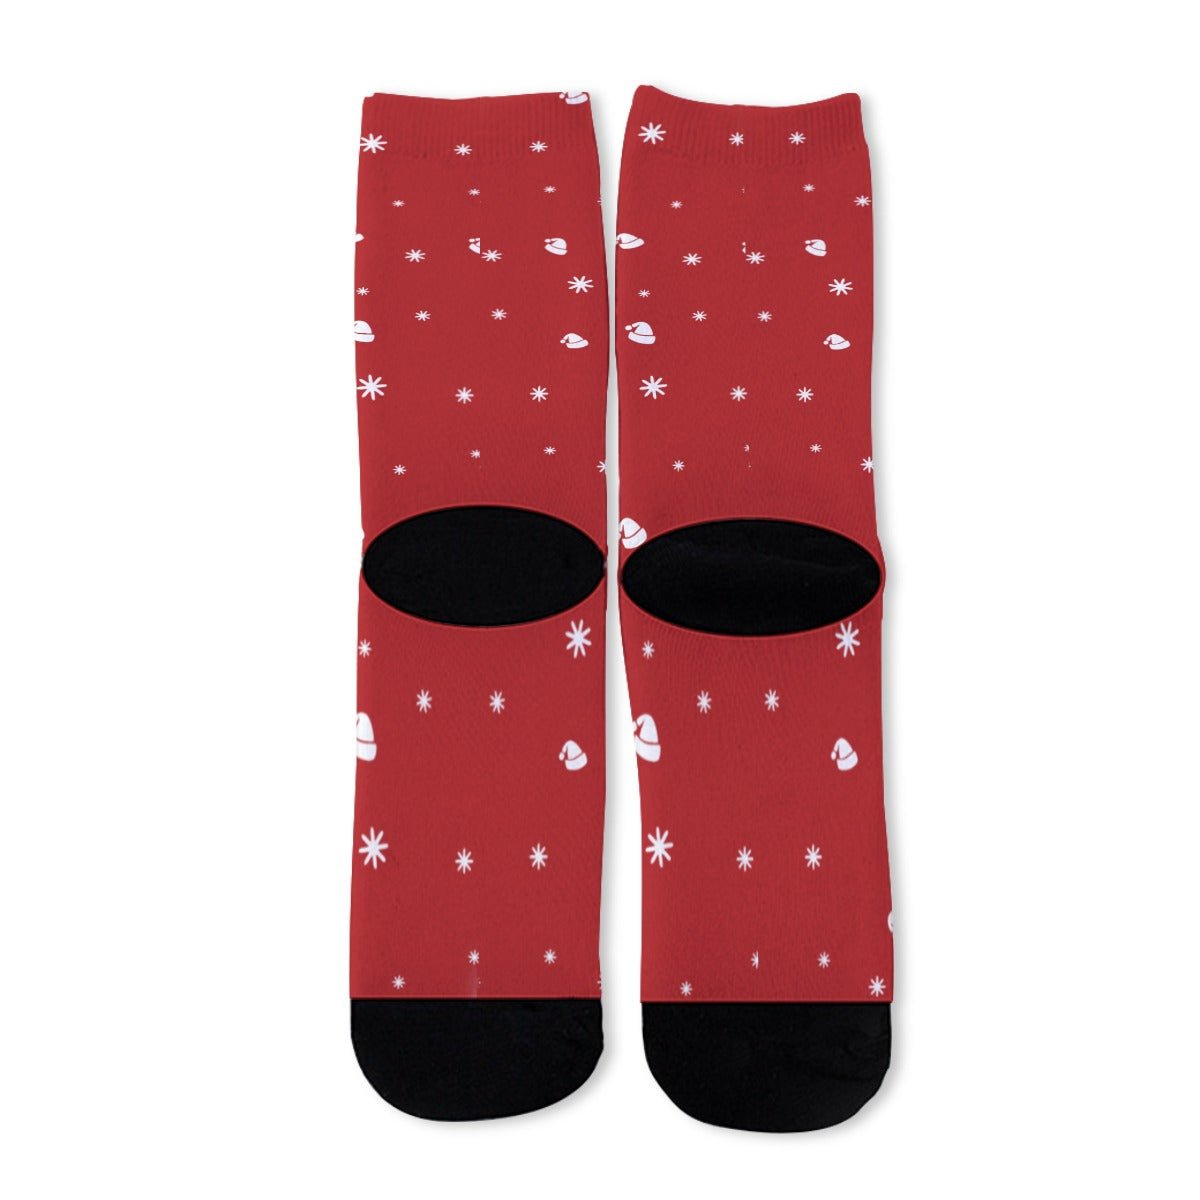 Unisex Long Socks - Red - Hats and Snowflakes - Festive Style